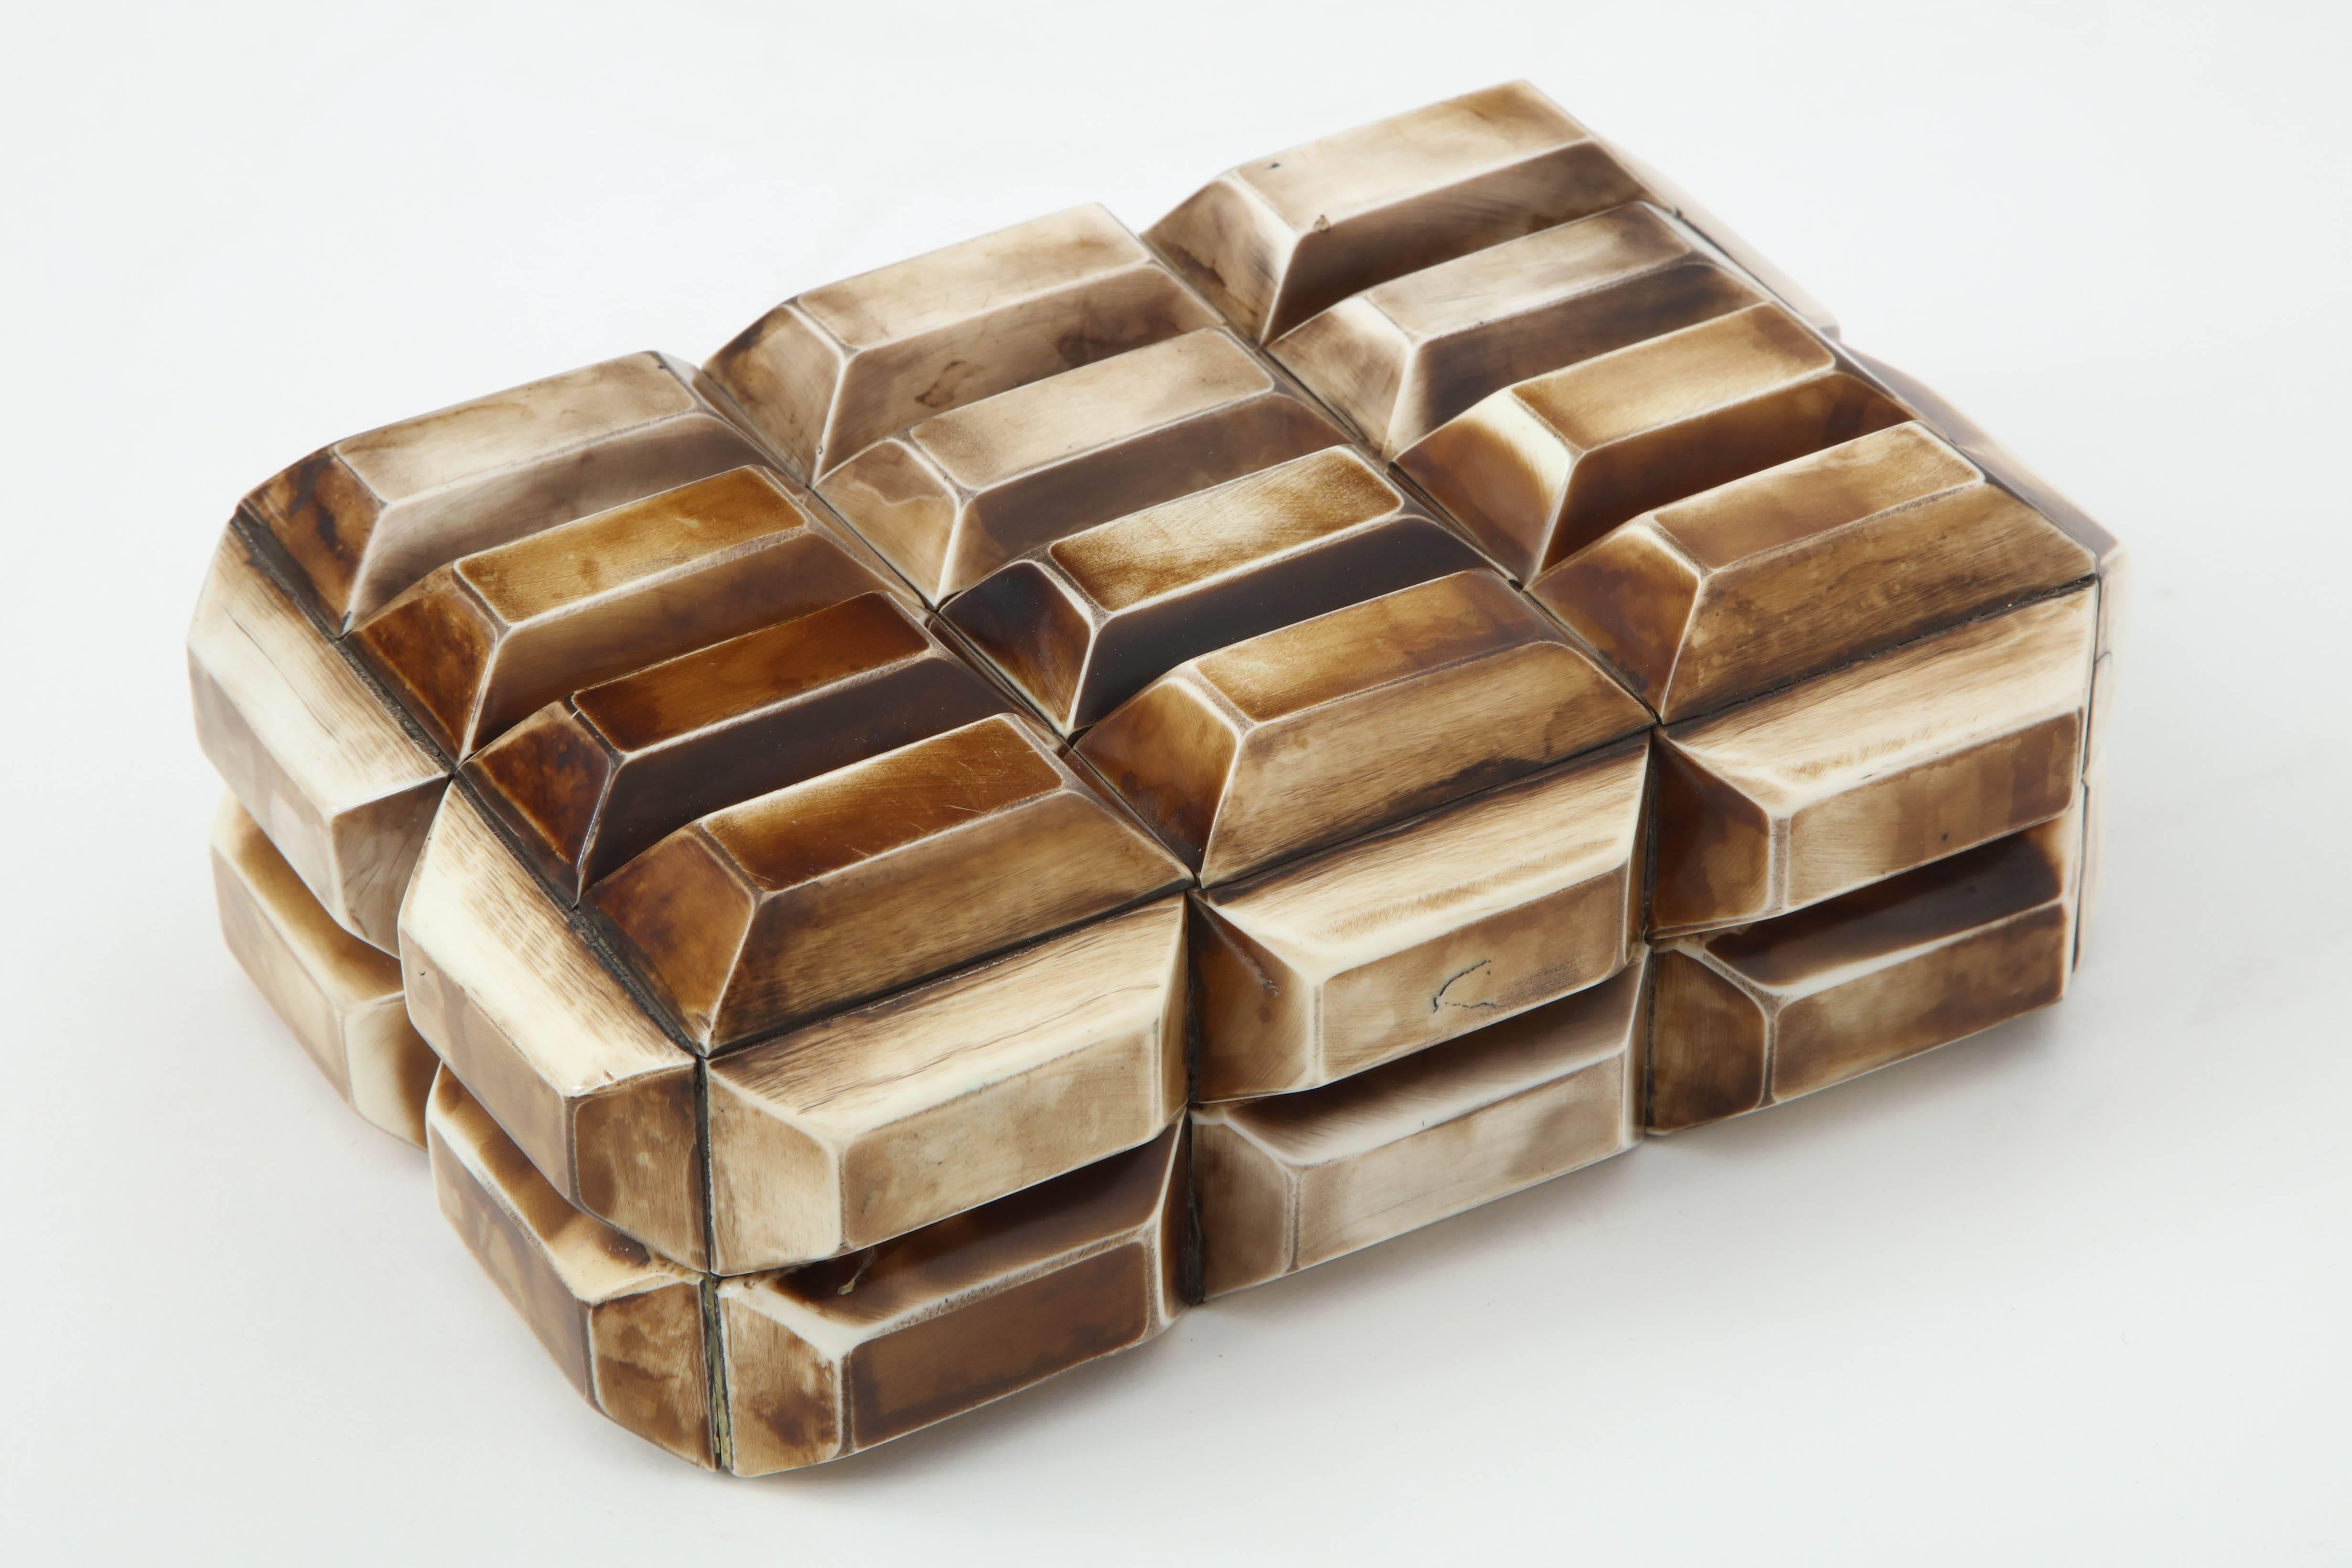 Modernist keepsake box composed of heat pressed faceted bone segments with an aged finish, lined in wood.